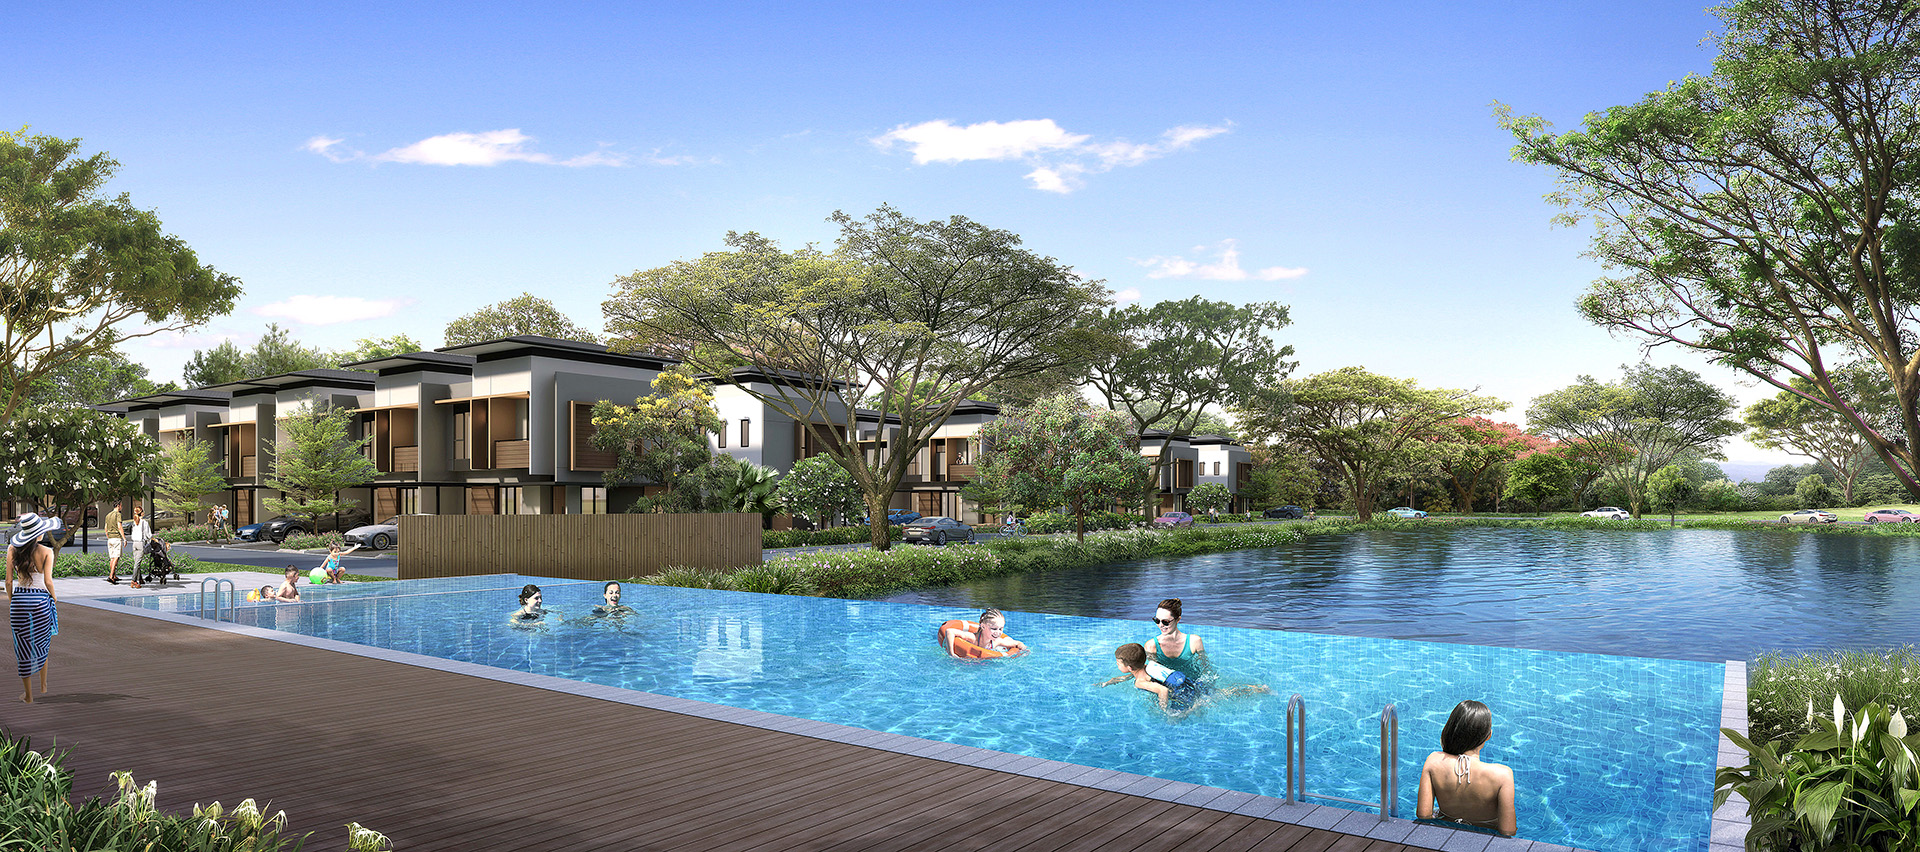 http://images-residence.summarecon.com/images/gallery/article/15522/view pool clubhouse_MR.jpg